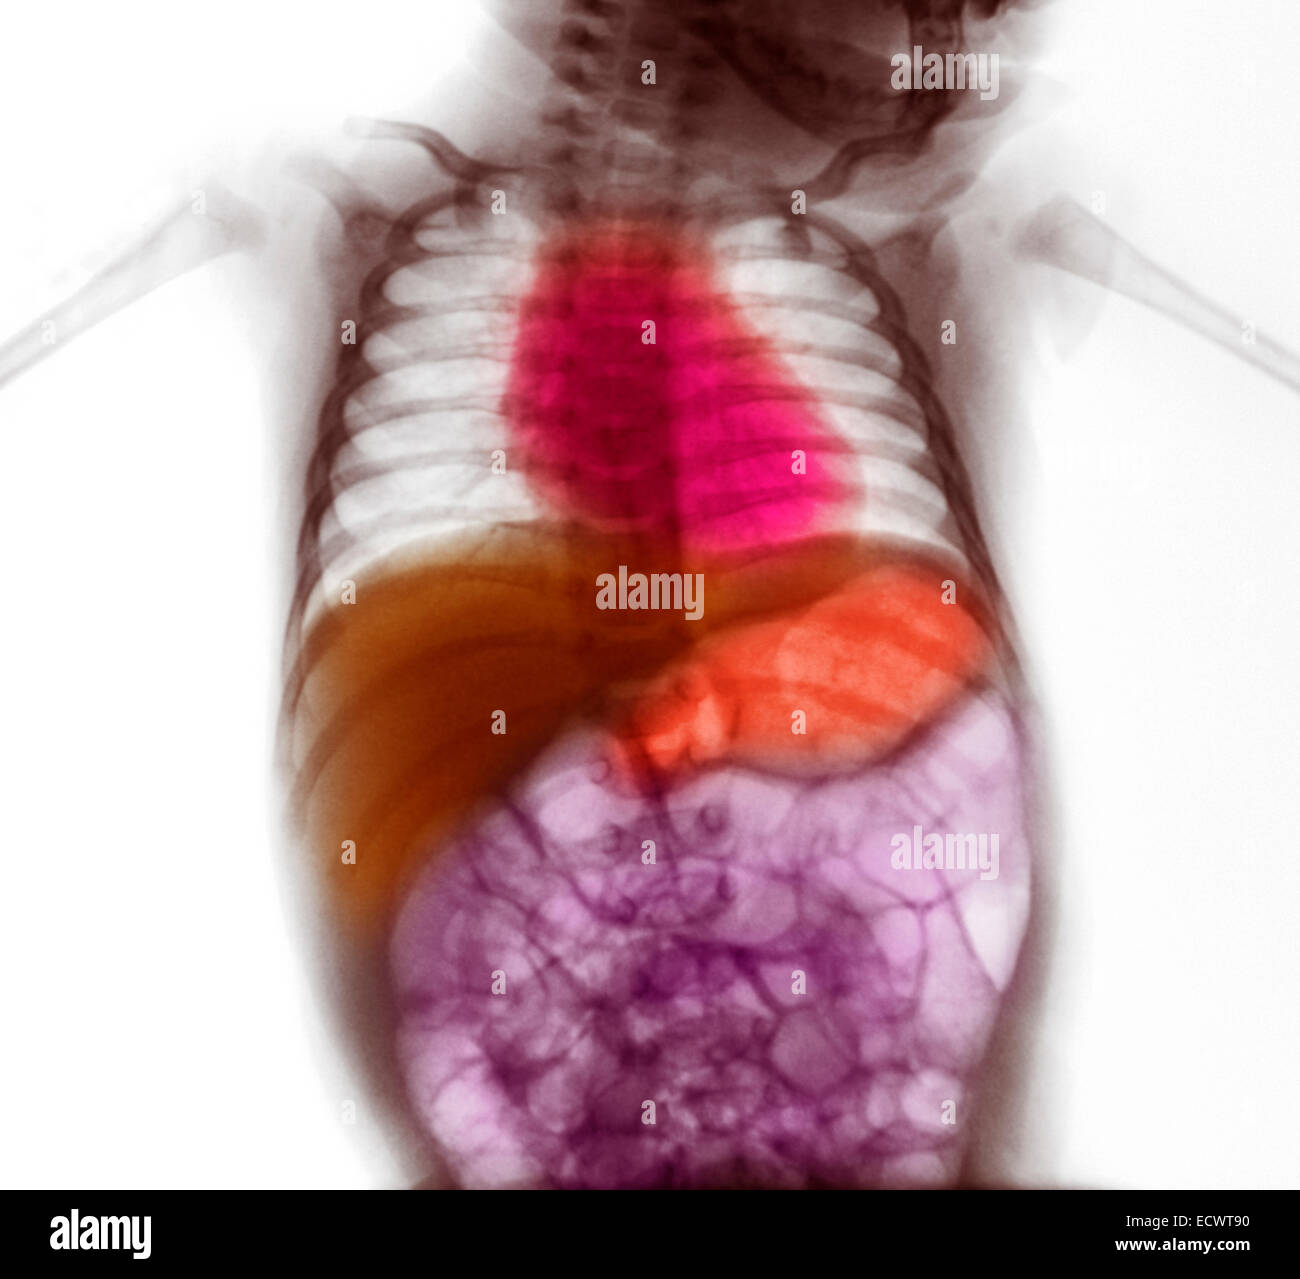 X-ray showing gaseous distension of the intestines. Stock Photo